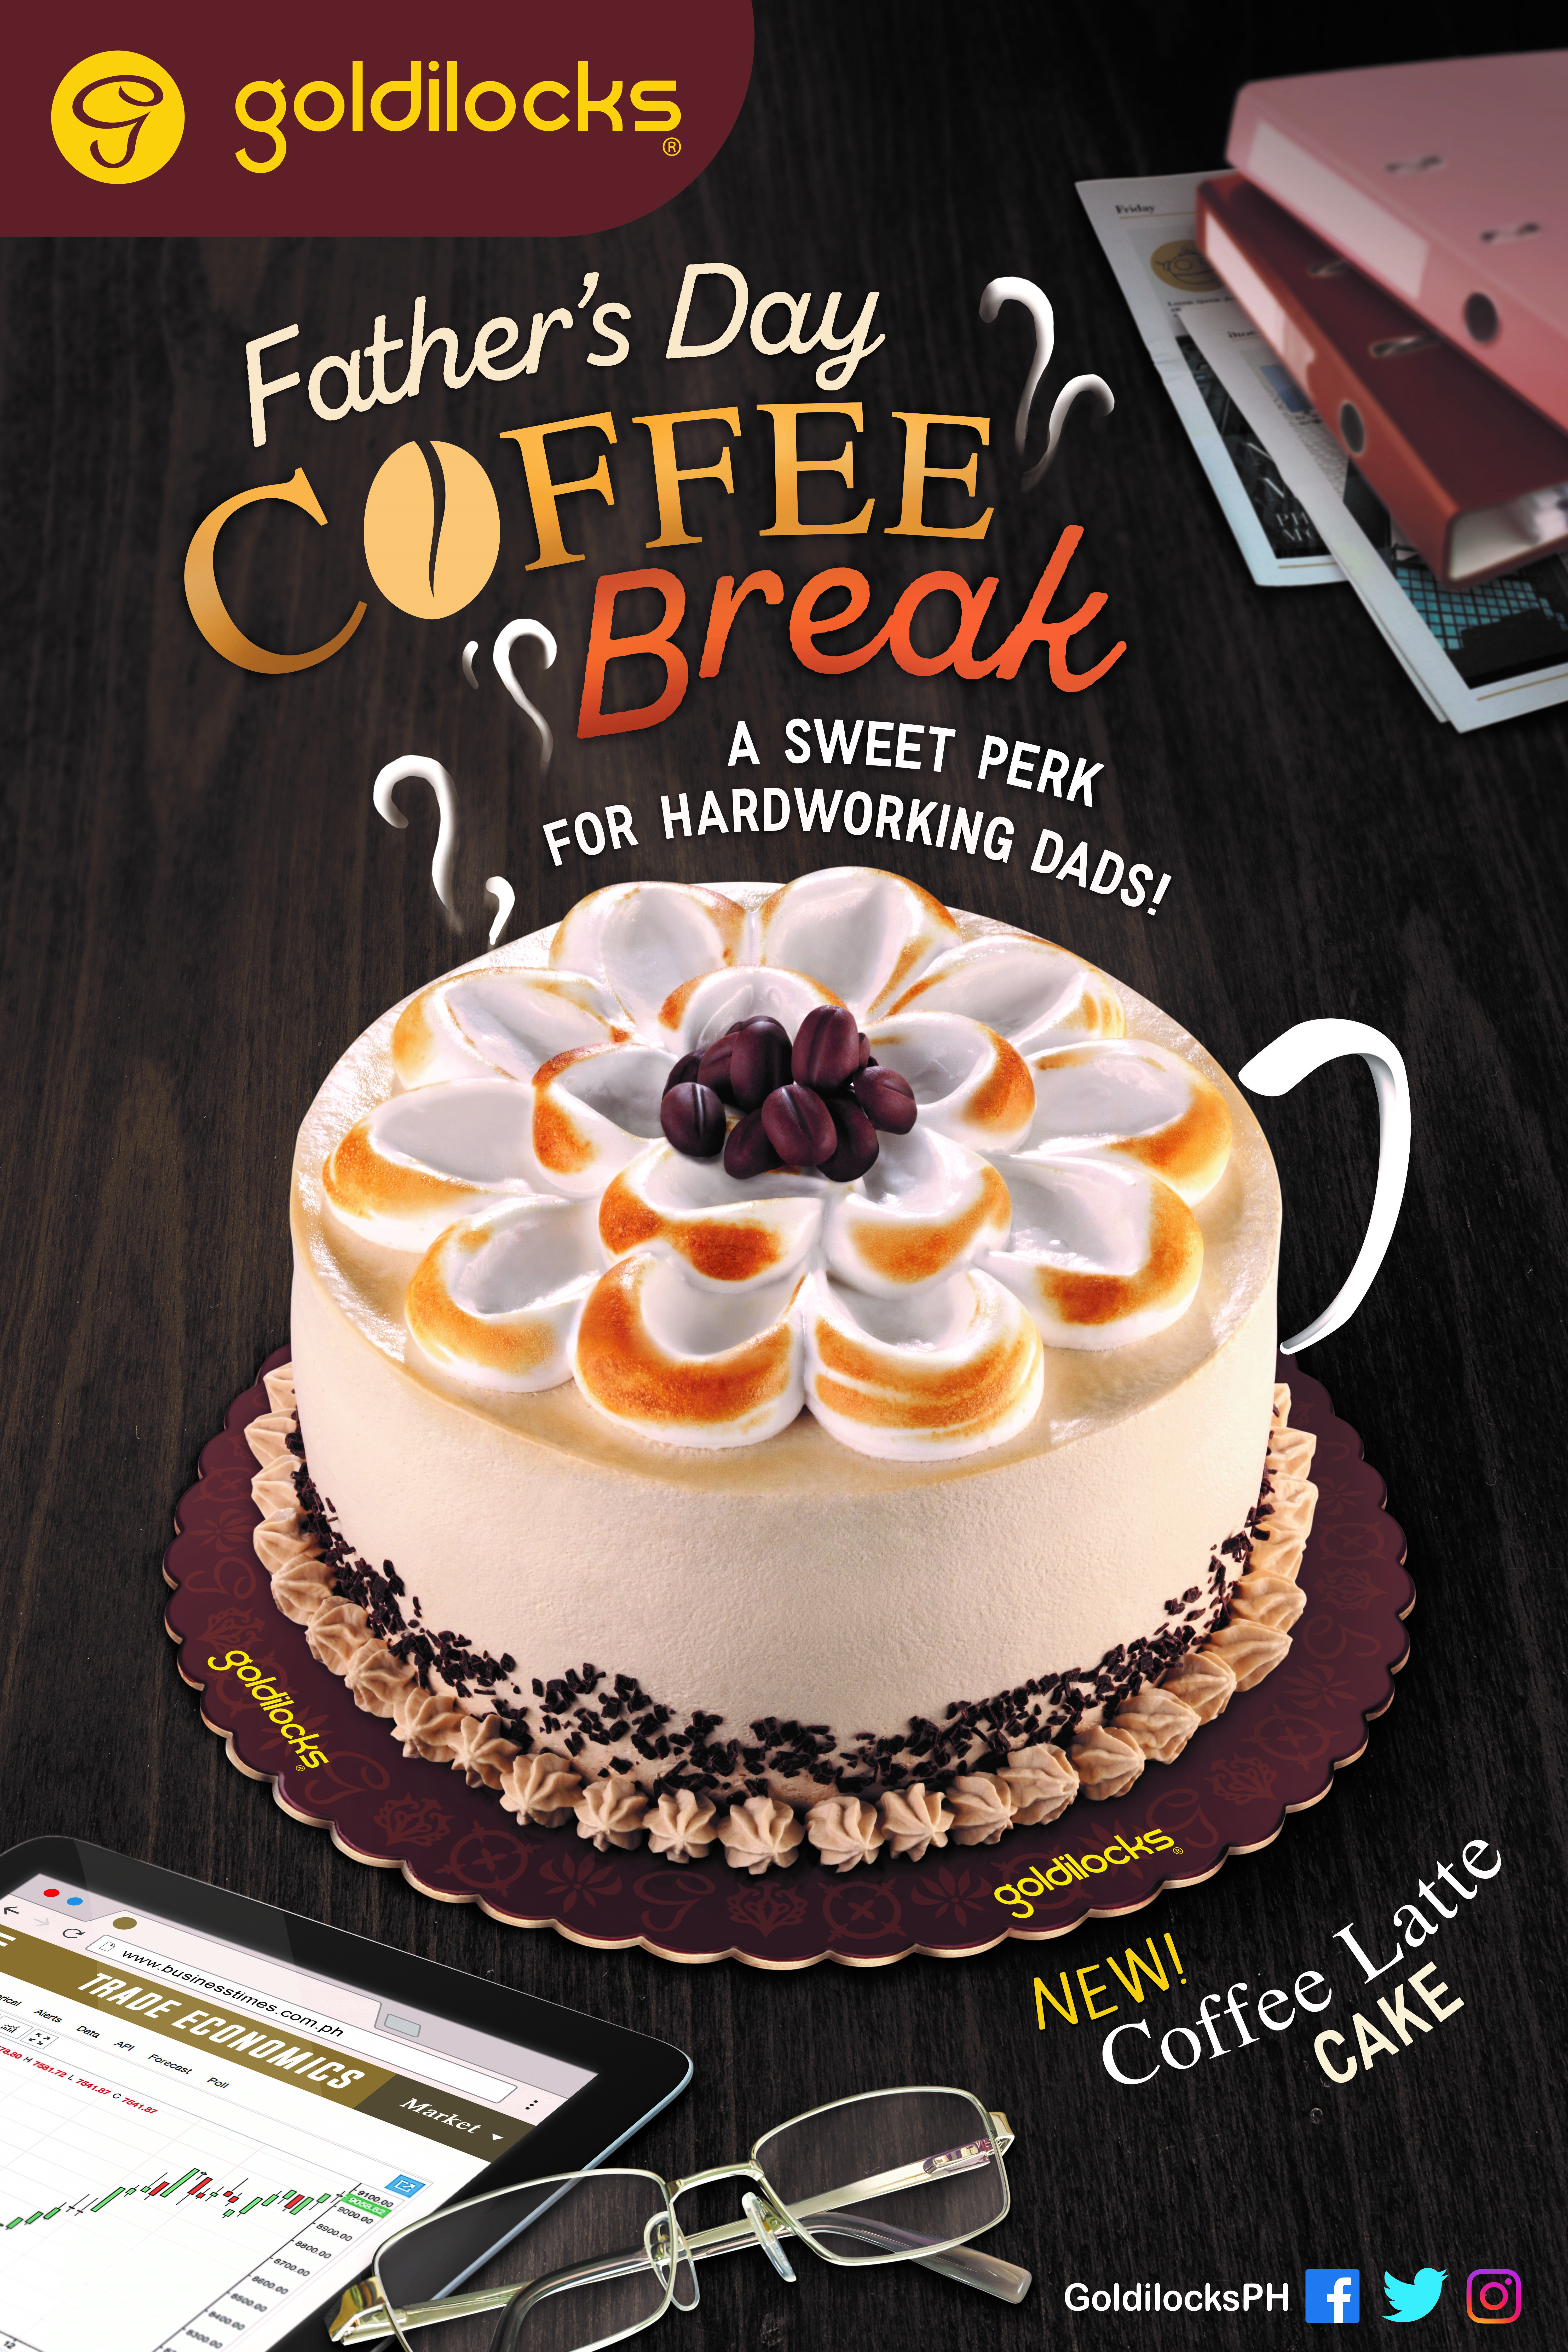 Goldilocks has a special cake for all hard working dad’s out there called the Coffee Latte Cake